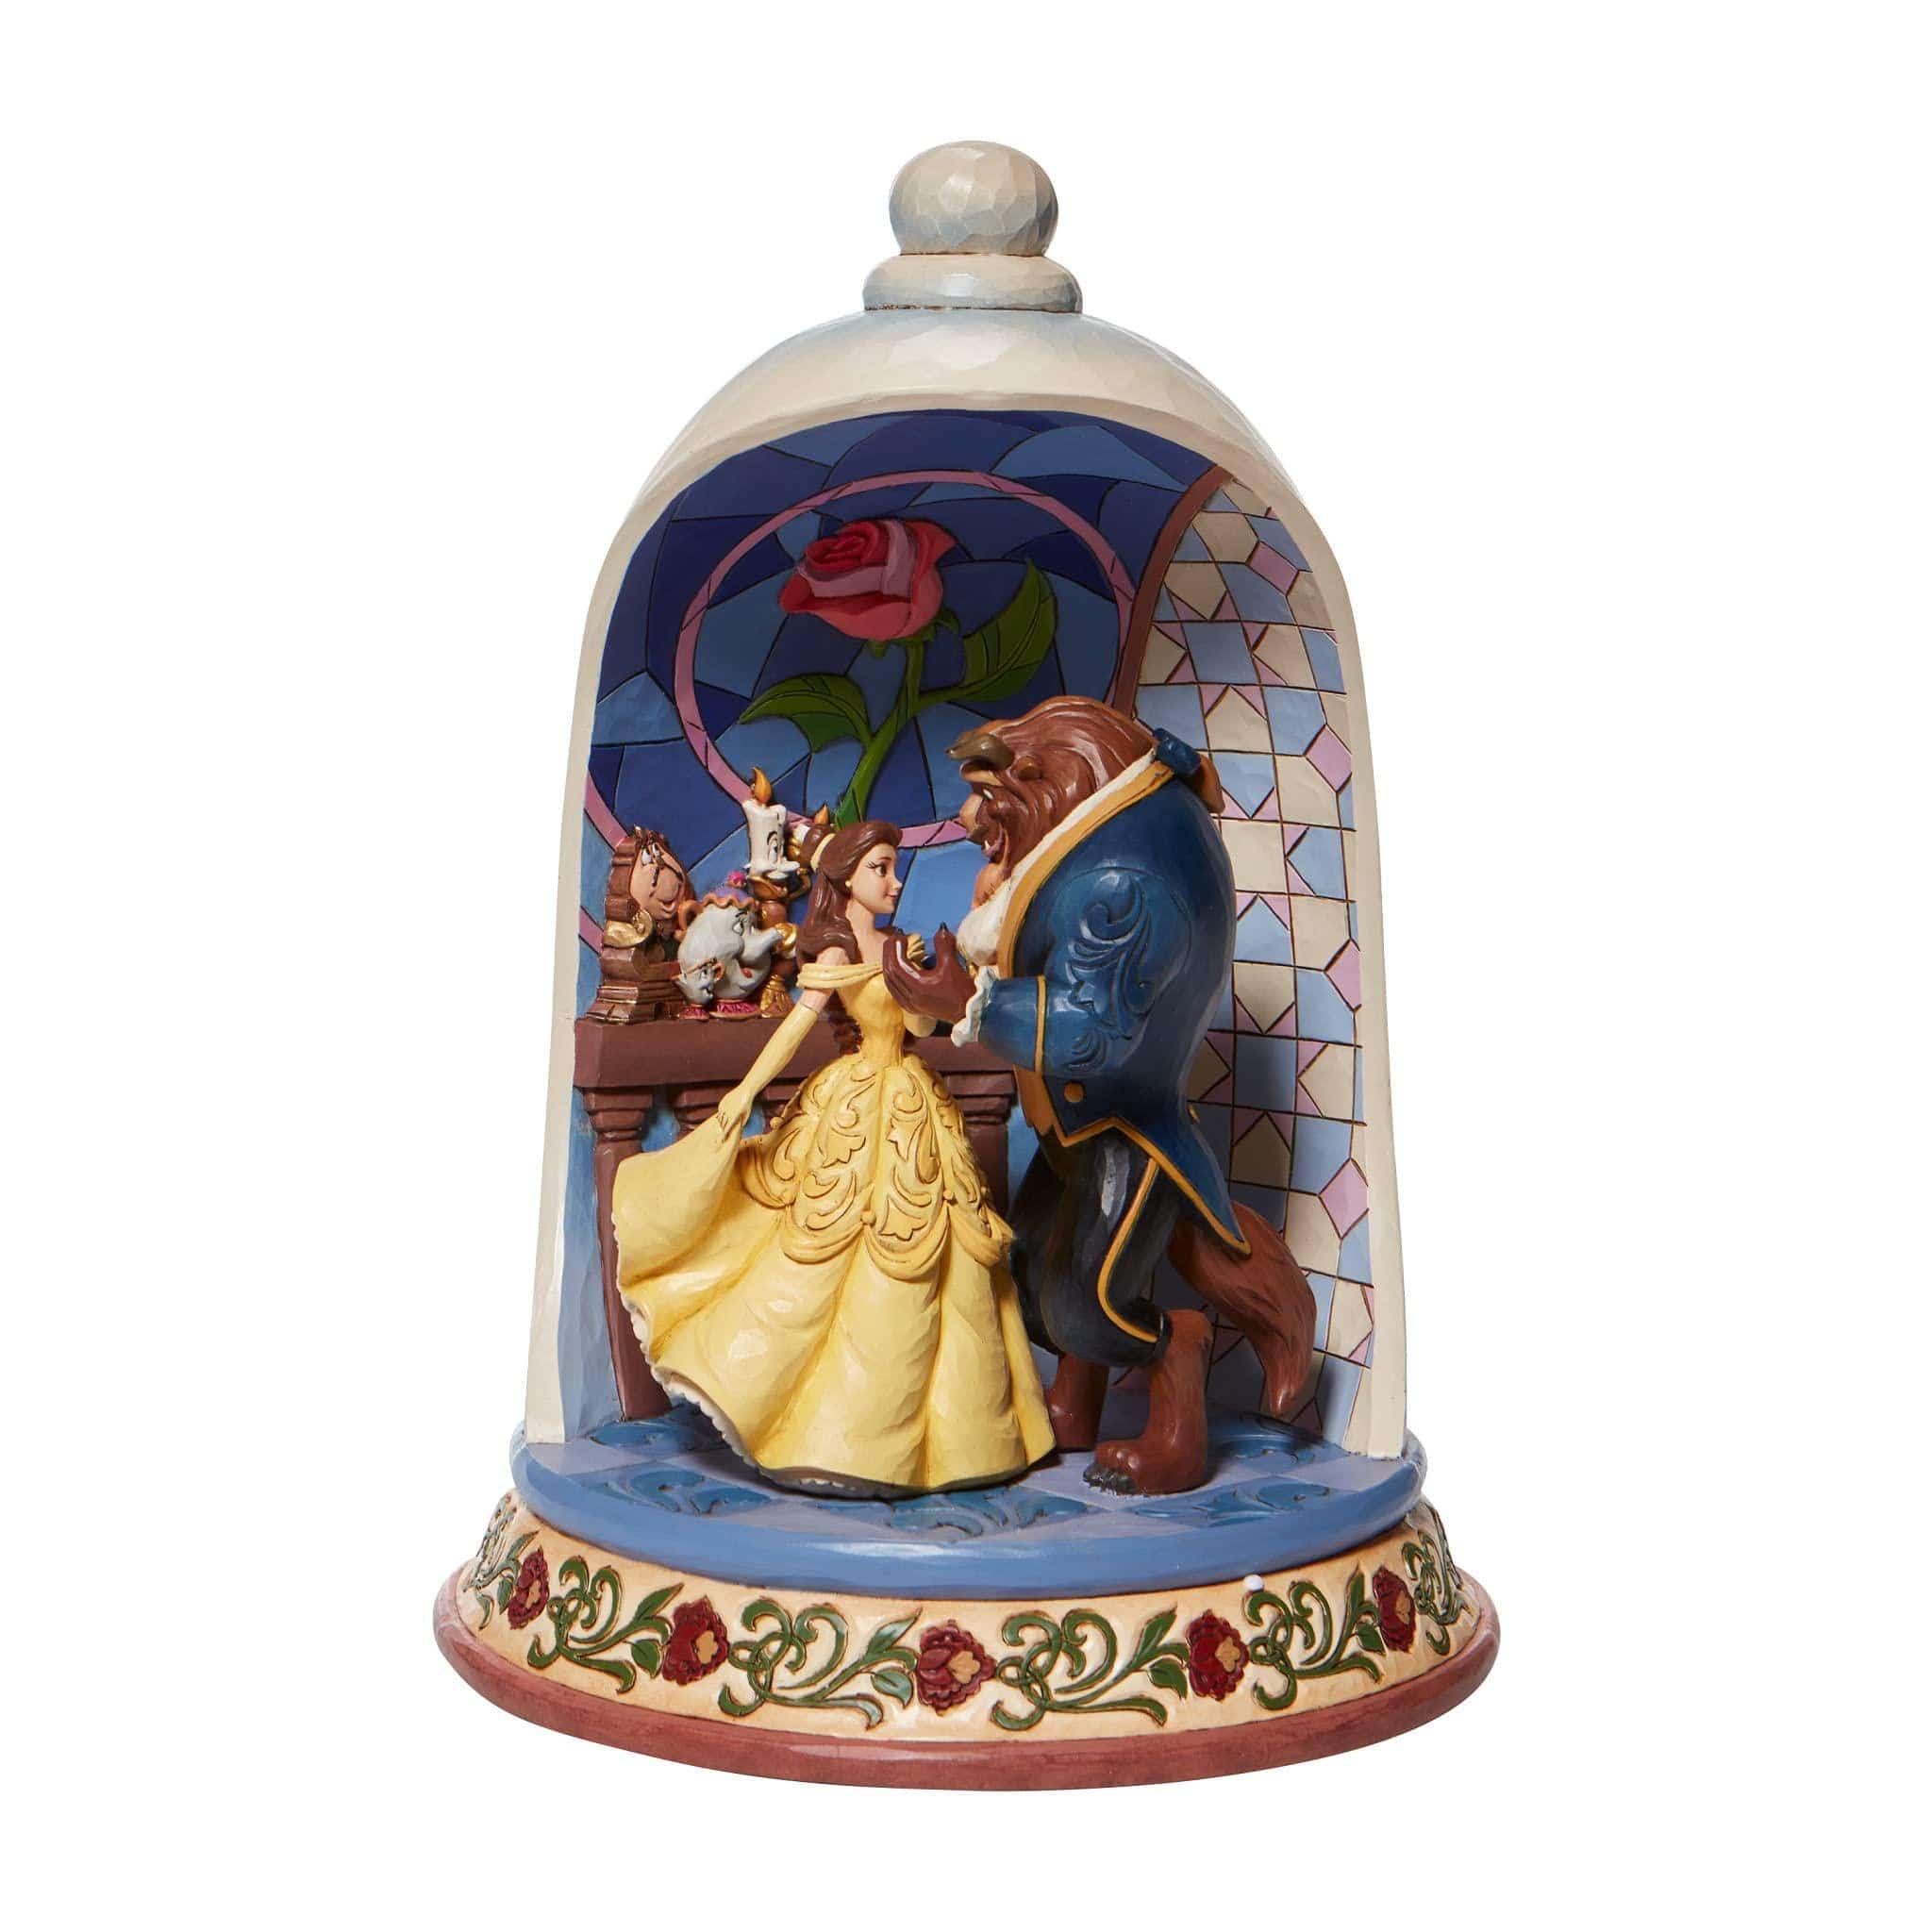 Enesco Disney Ornament Disney Traditions Figurine -Enchanted Love - Beauty and the Beast Rose Dome